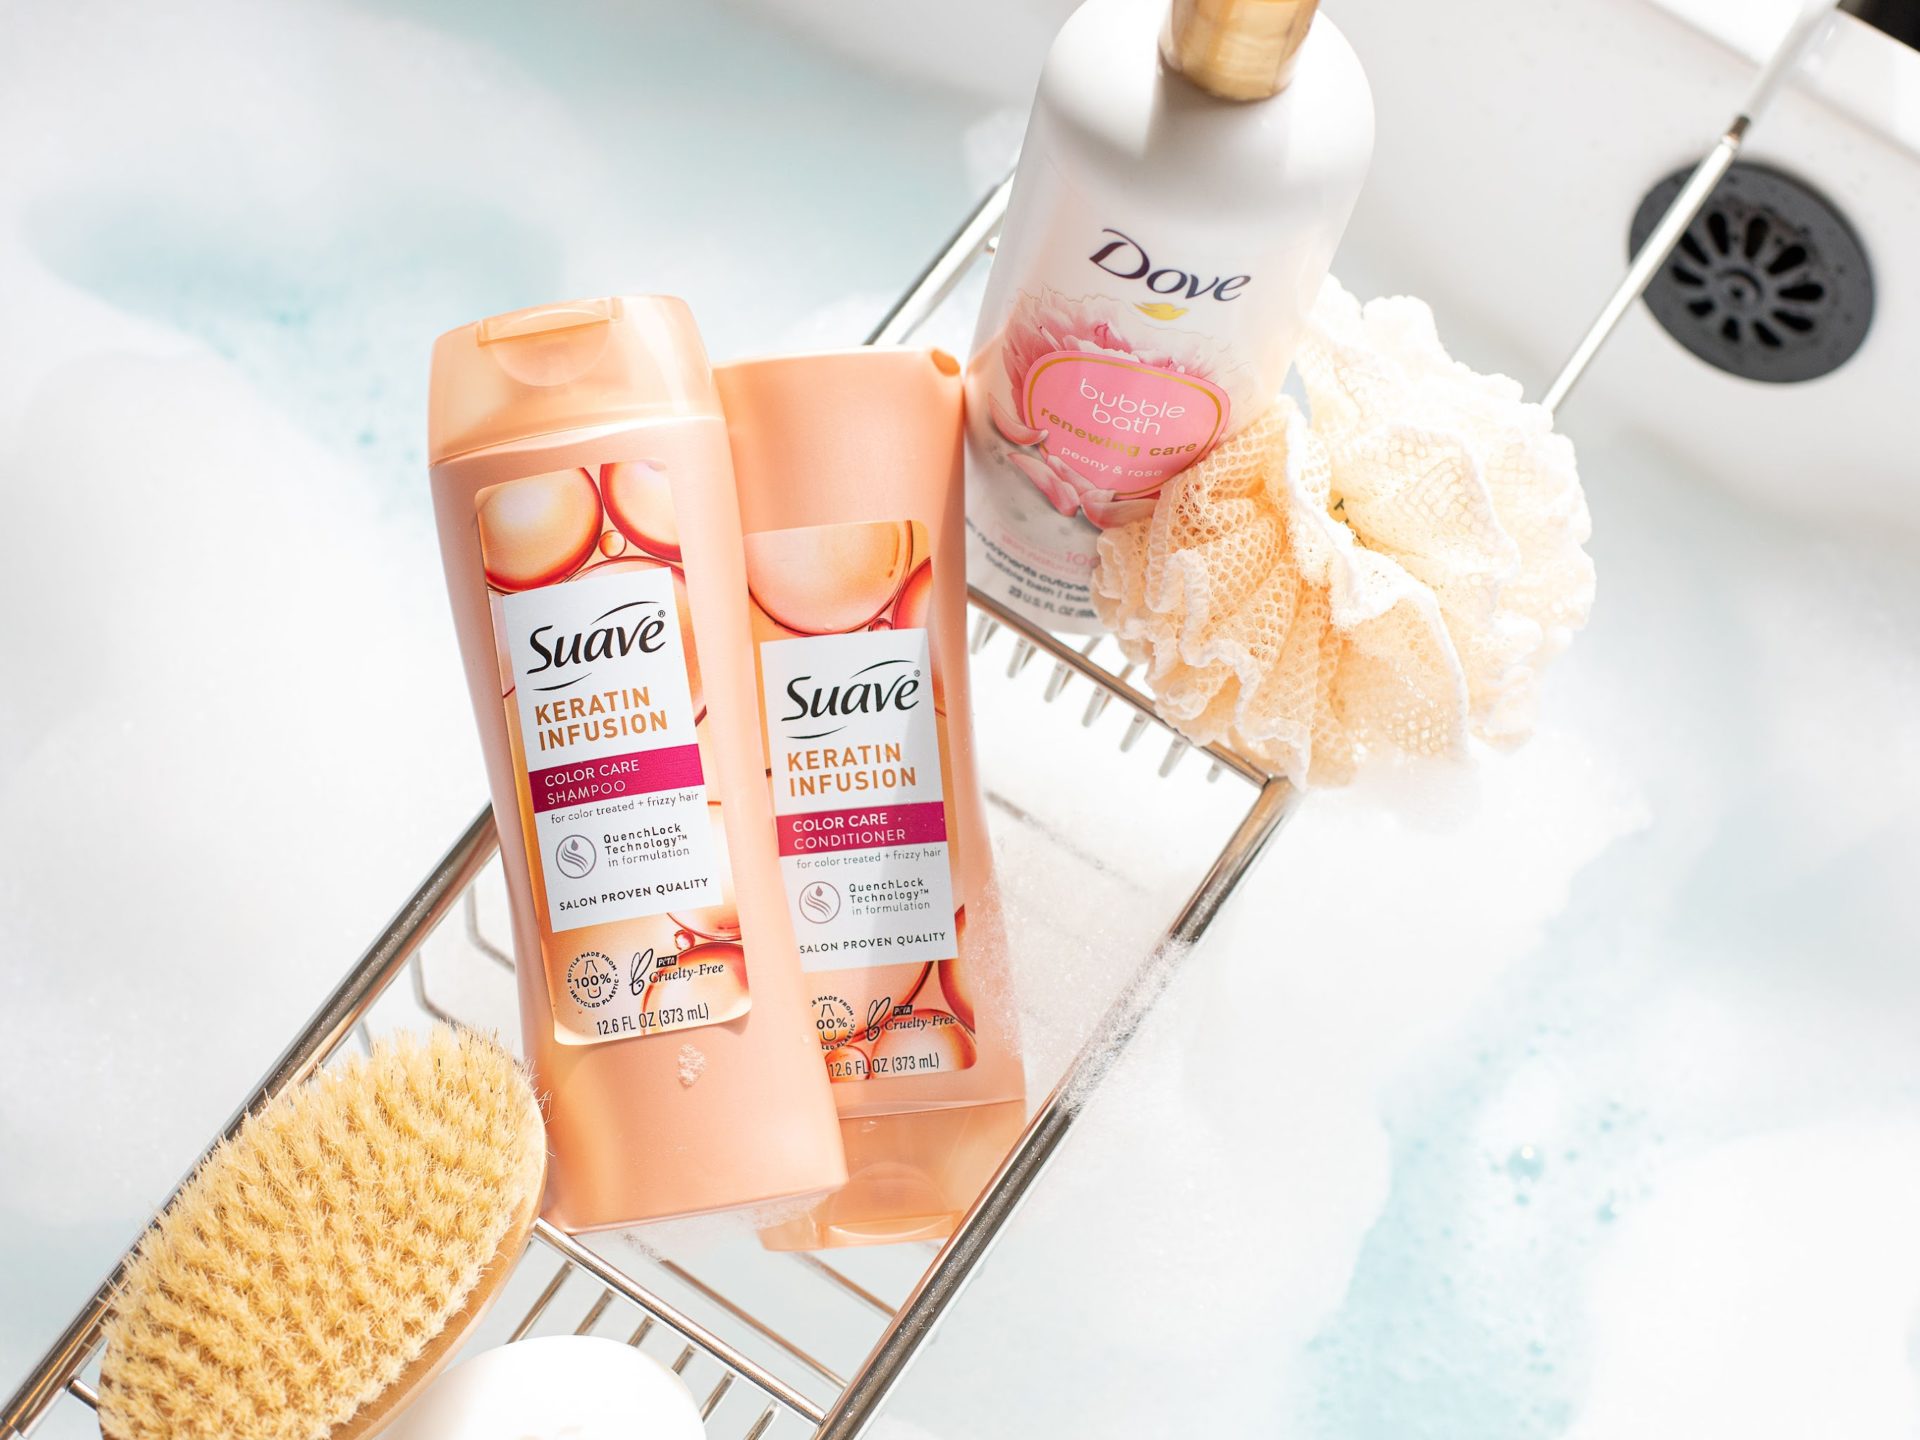 Get Suave Hair Care For $2.49 At Kroger